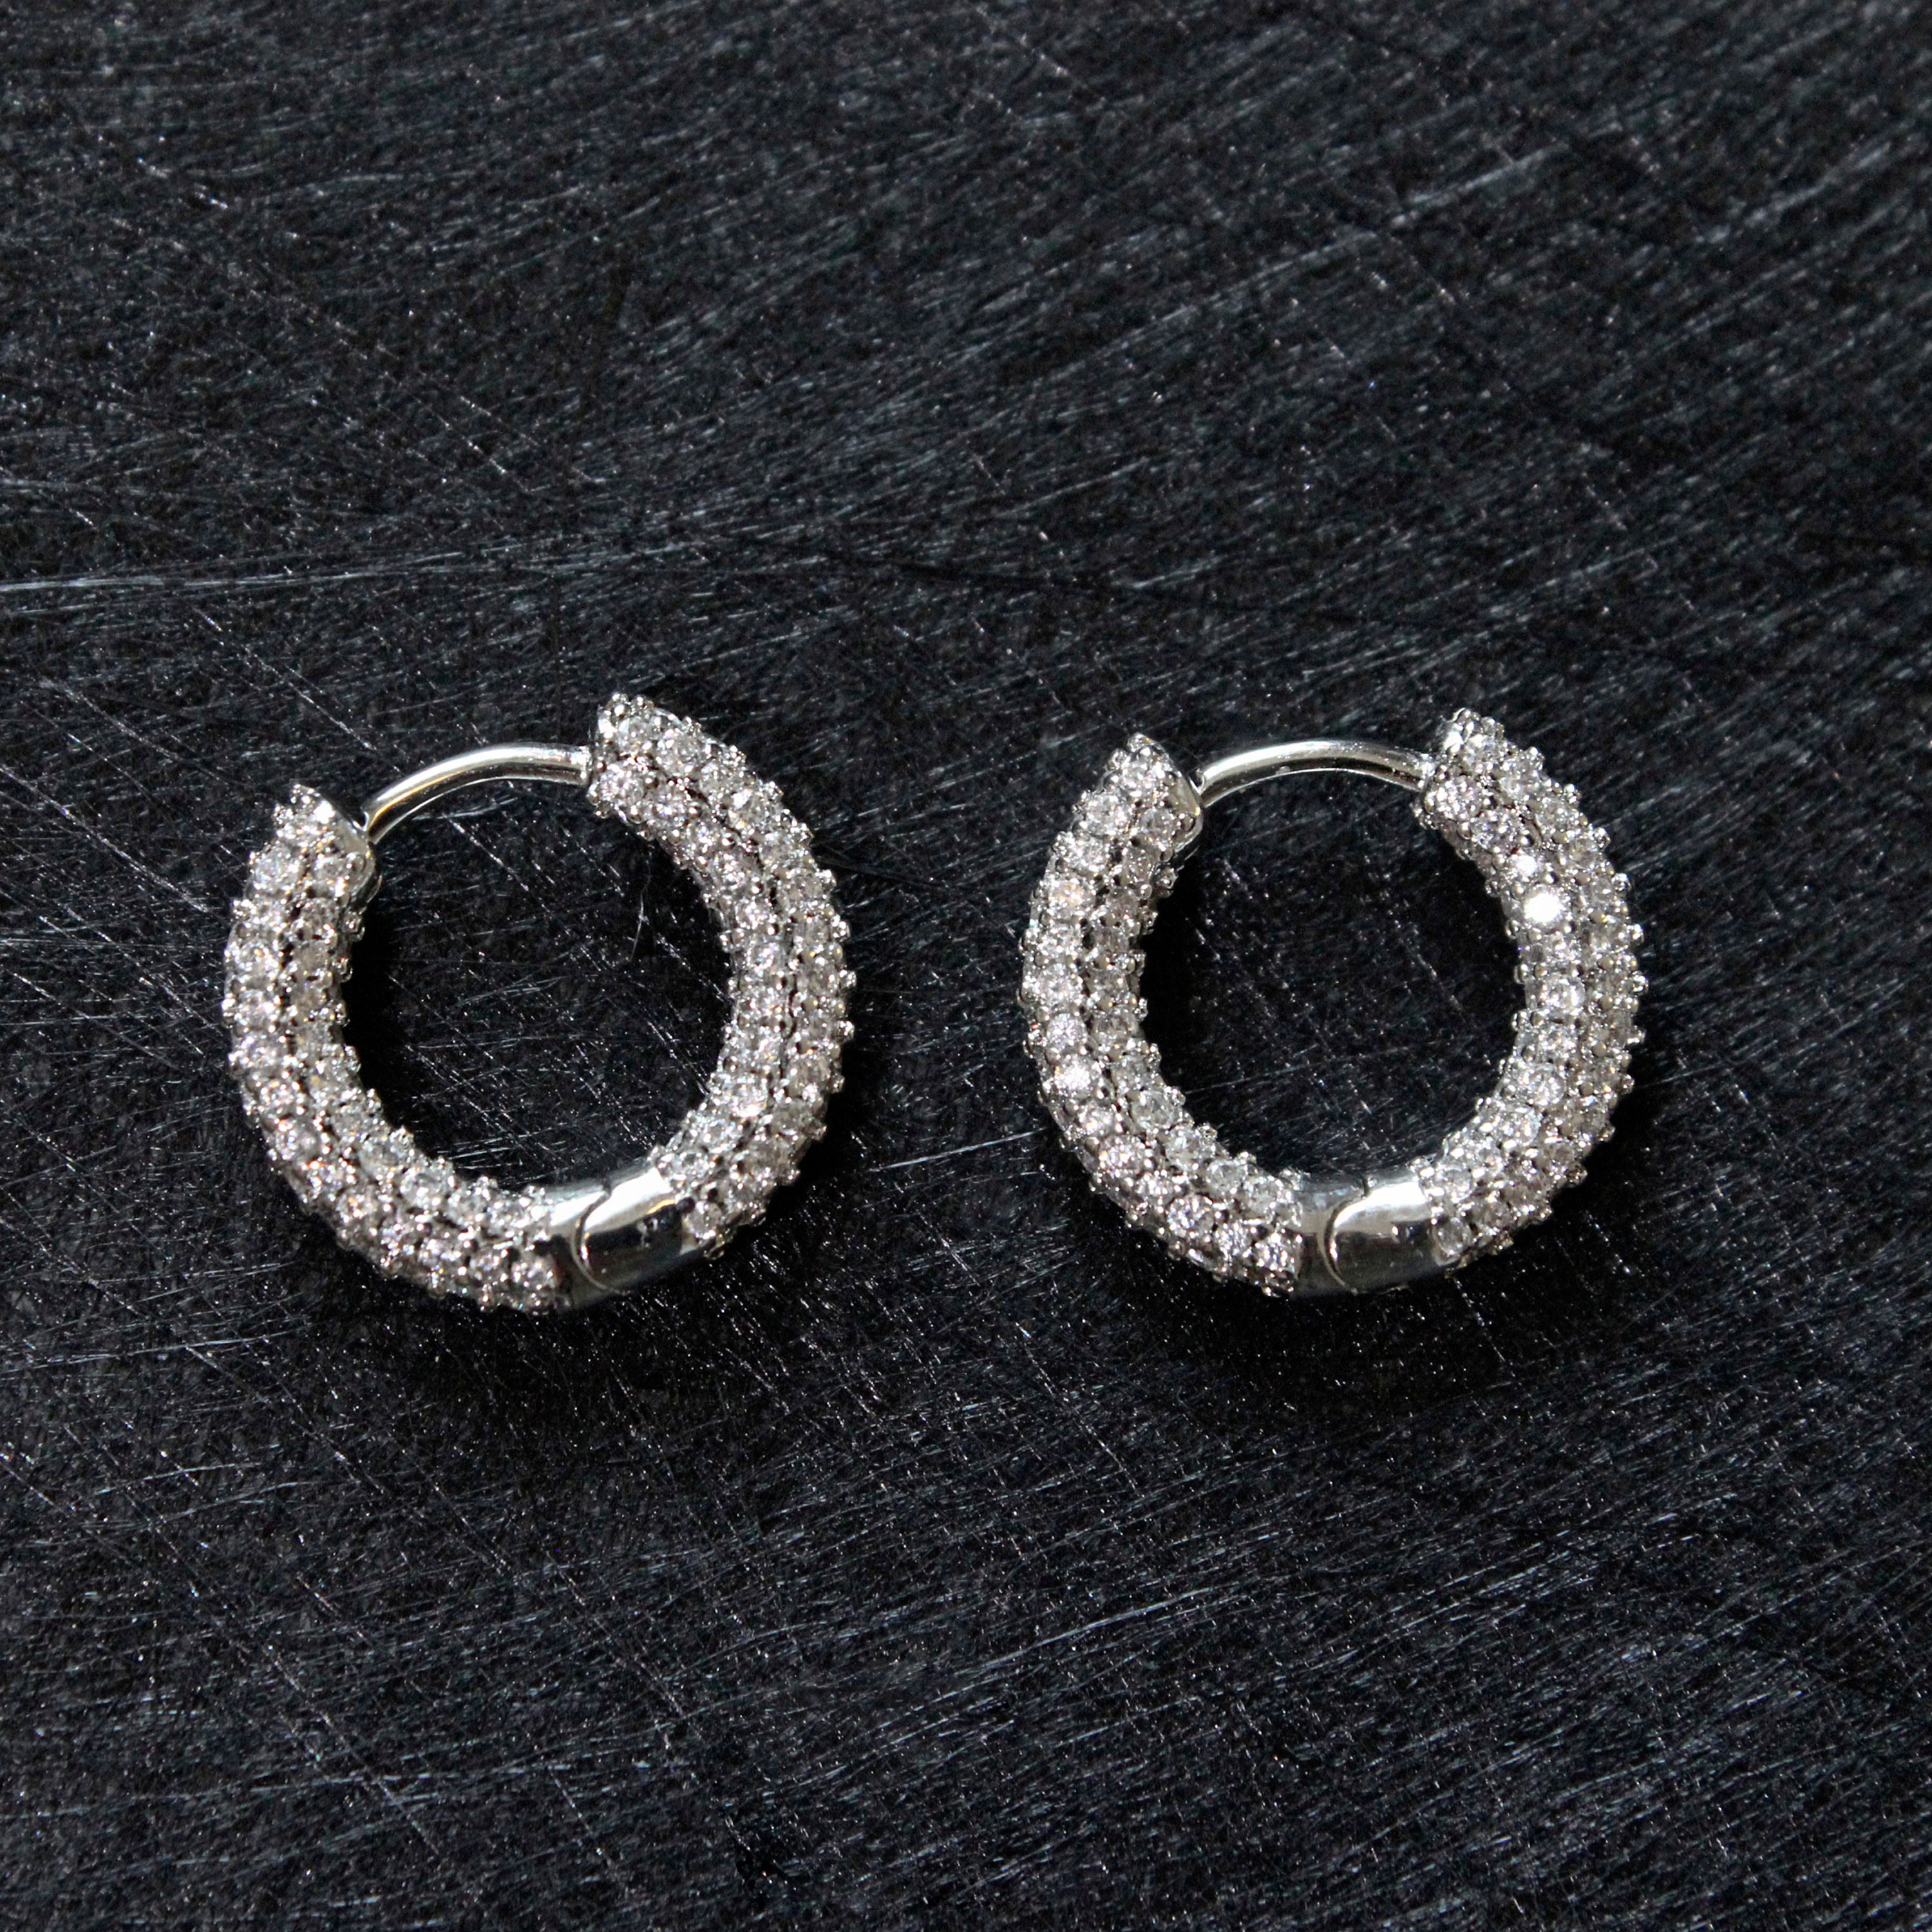 Round hoop earrings 8 cm with clasp, sterling silver 925, KL-470 4x70 mm -  SILVEXCRAFT